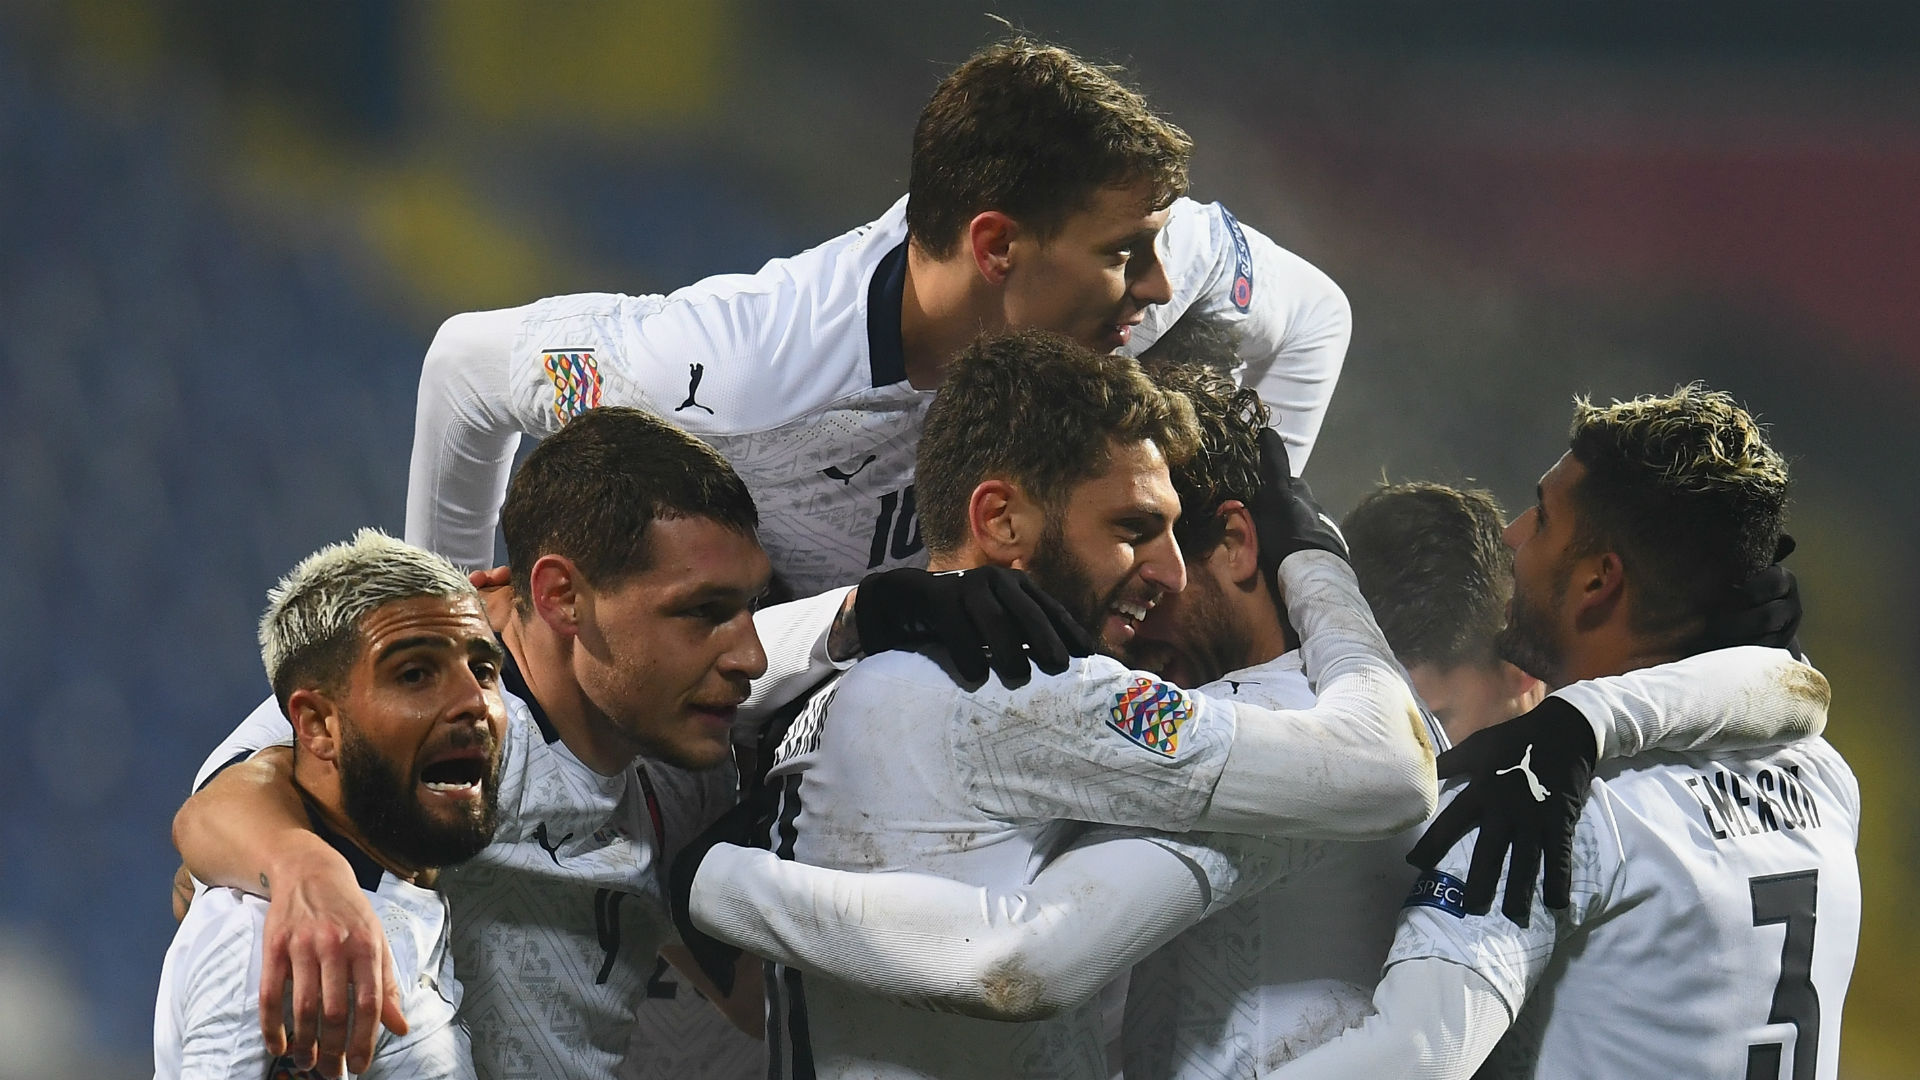 Italy booked their place into the Nations League Final Four on Wednesday night as they easily disposed of Bosnia Herzegovina in their last group stage test